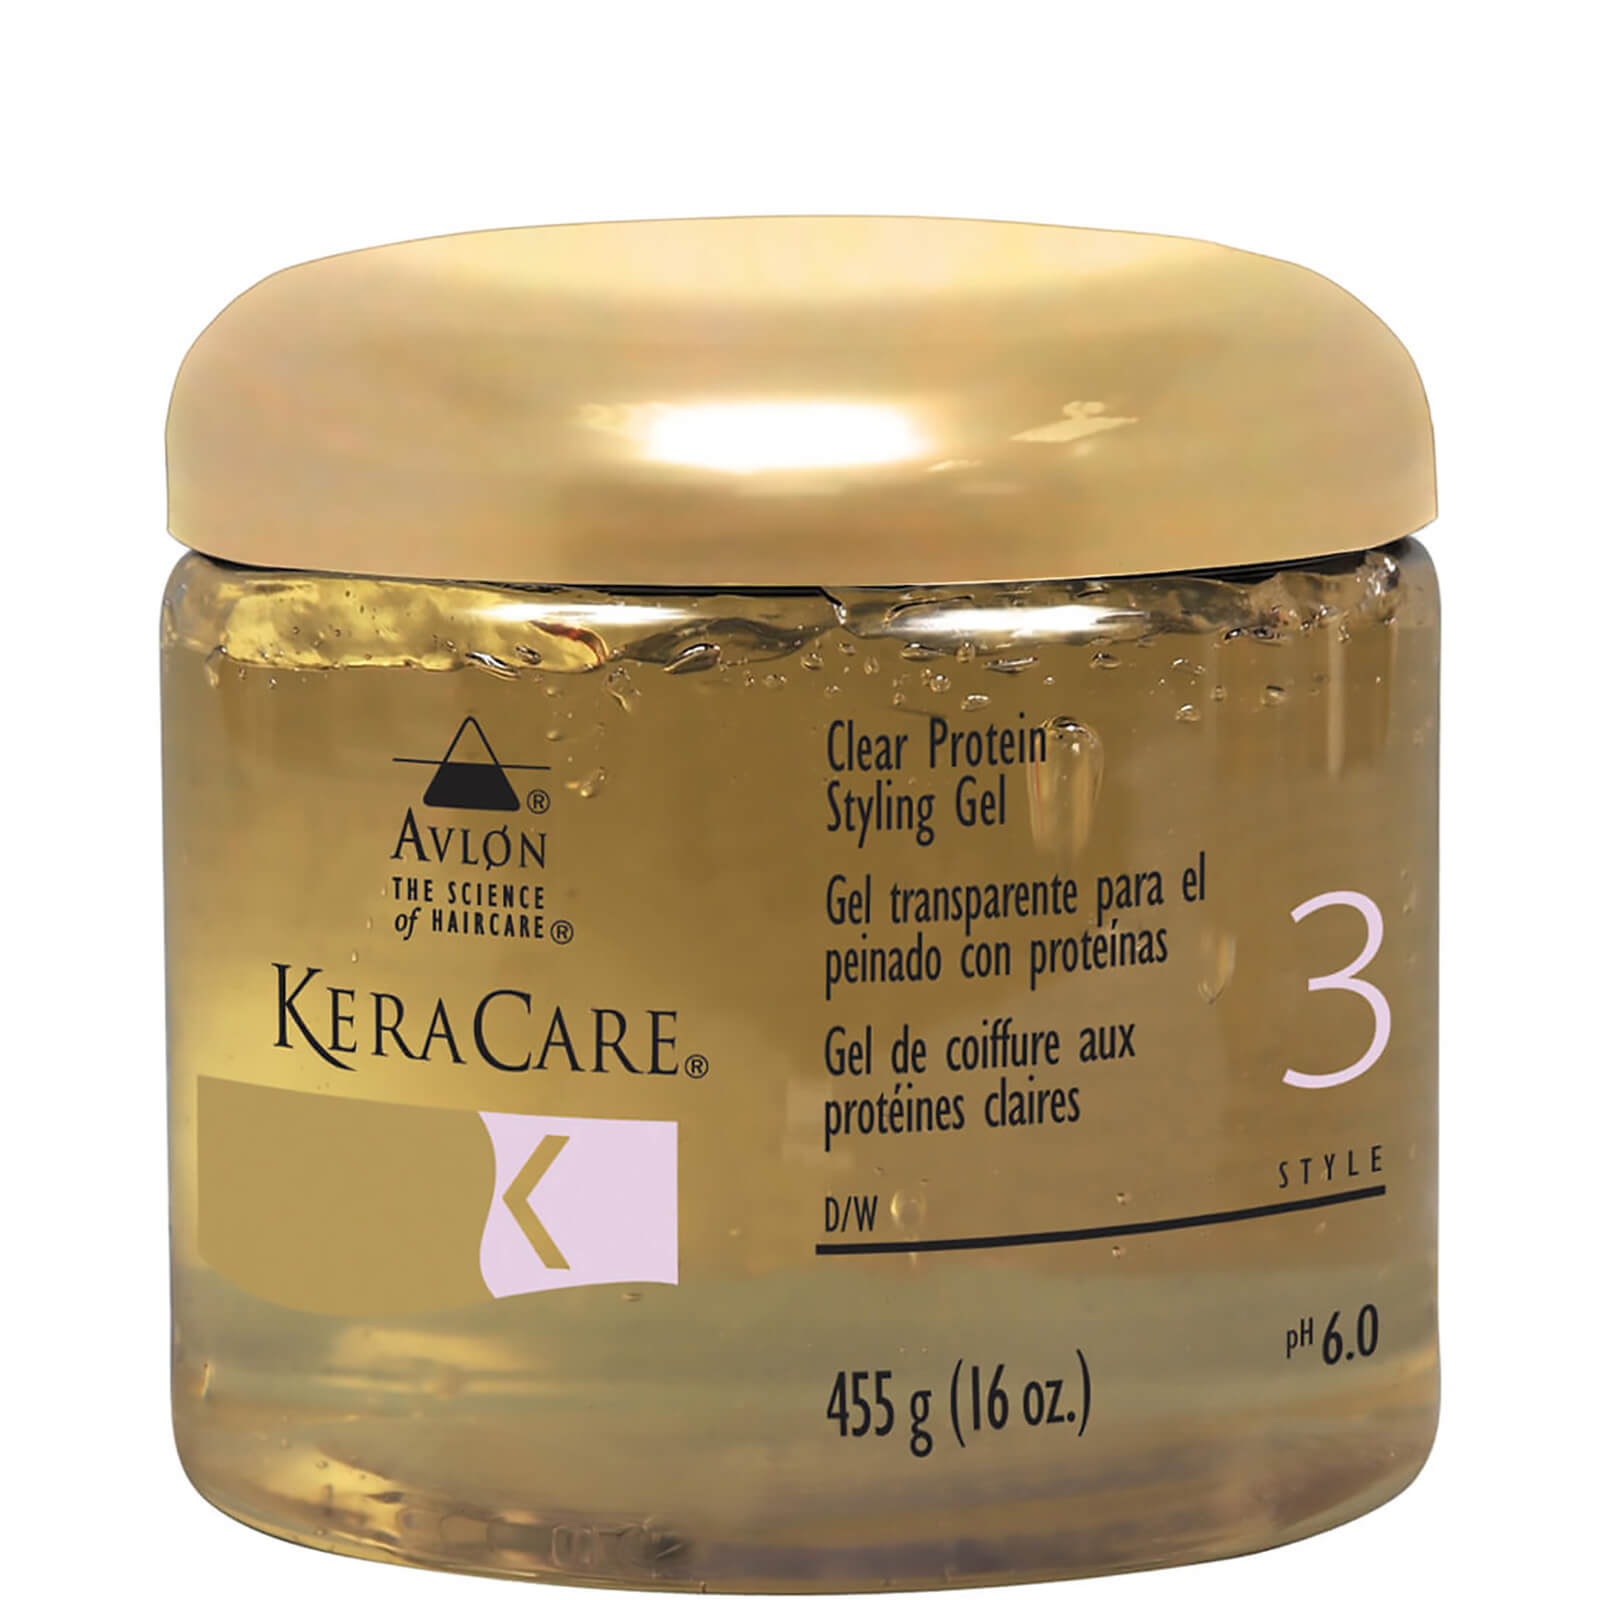 Keracare Protein Styling Gel Clear 16oz